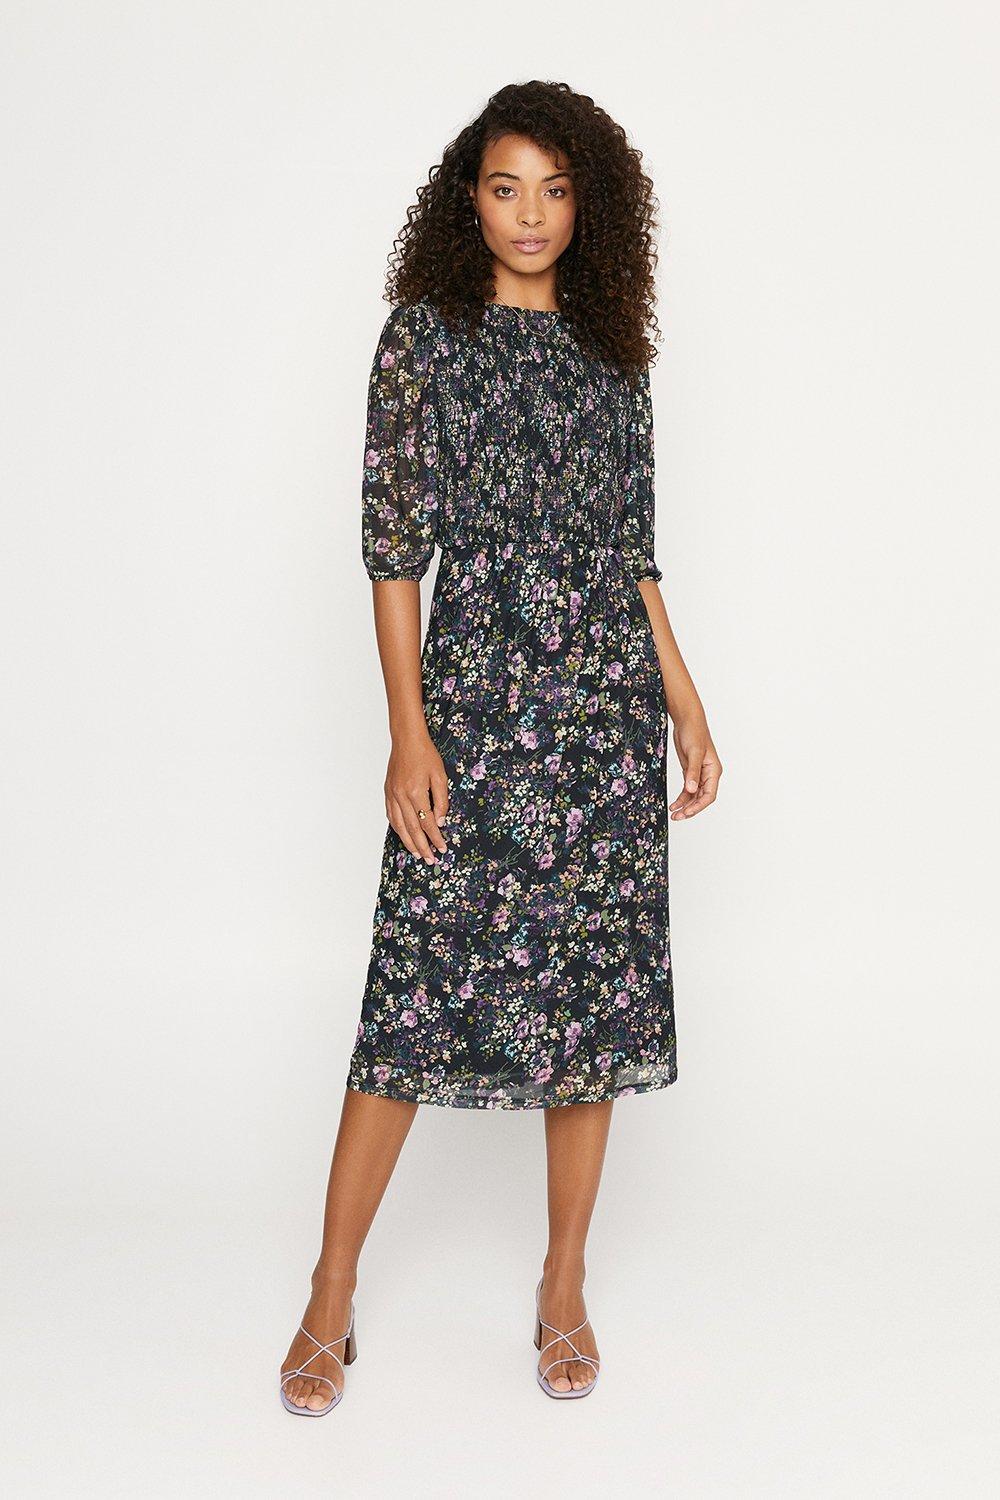 Smudgy Floral Midi Dress | Oasis